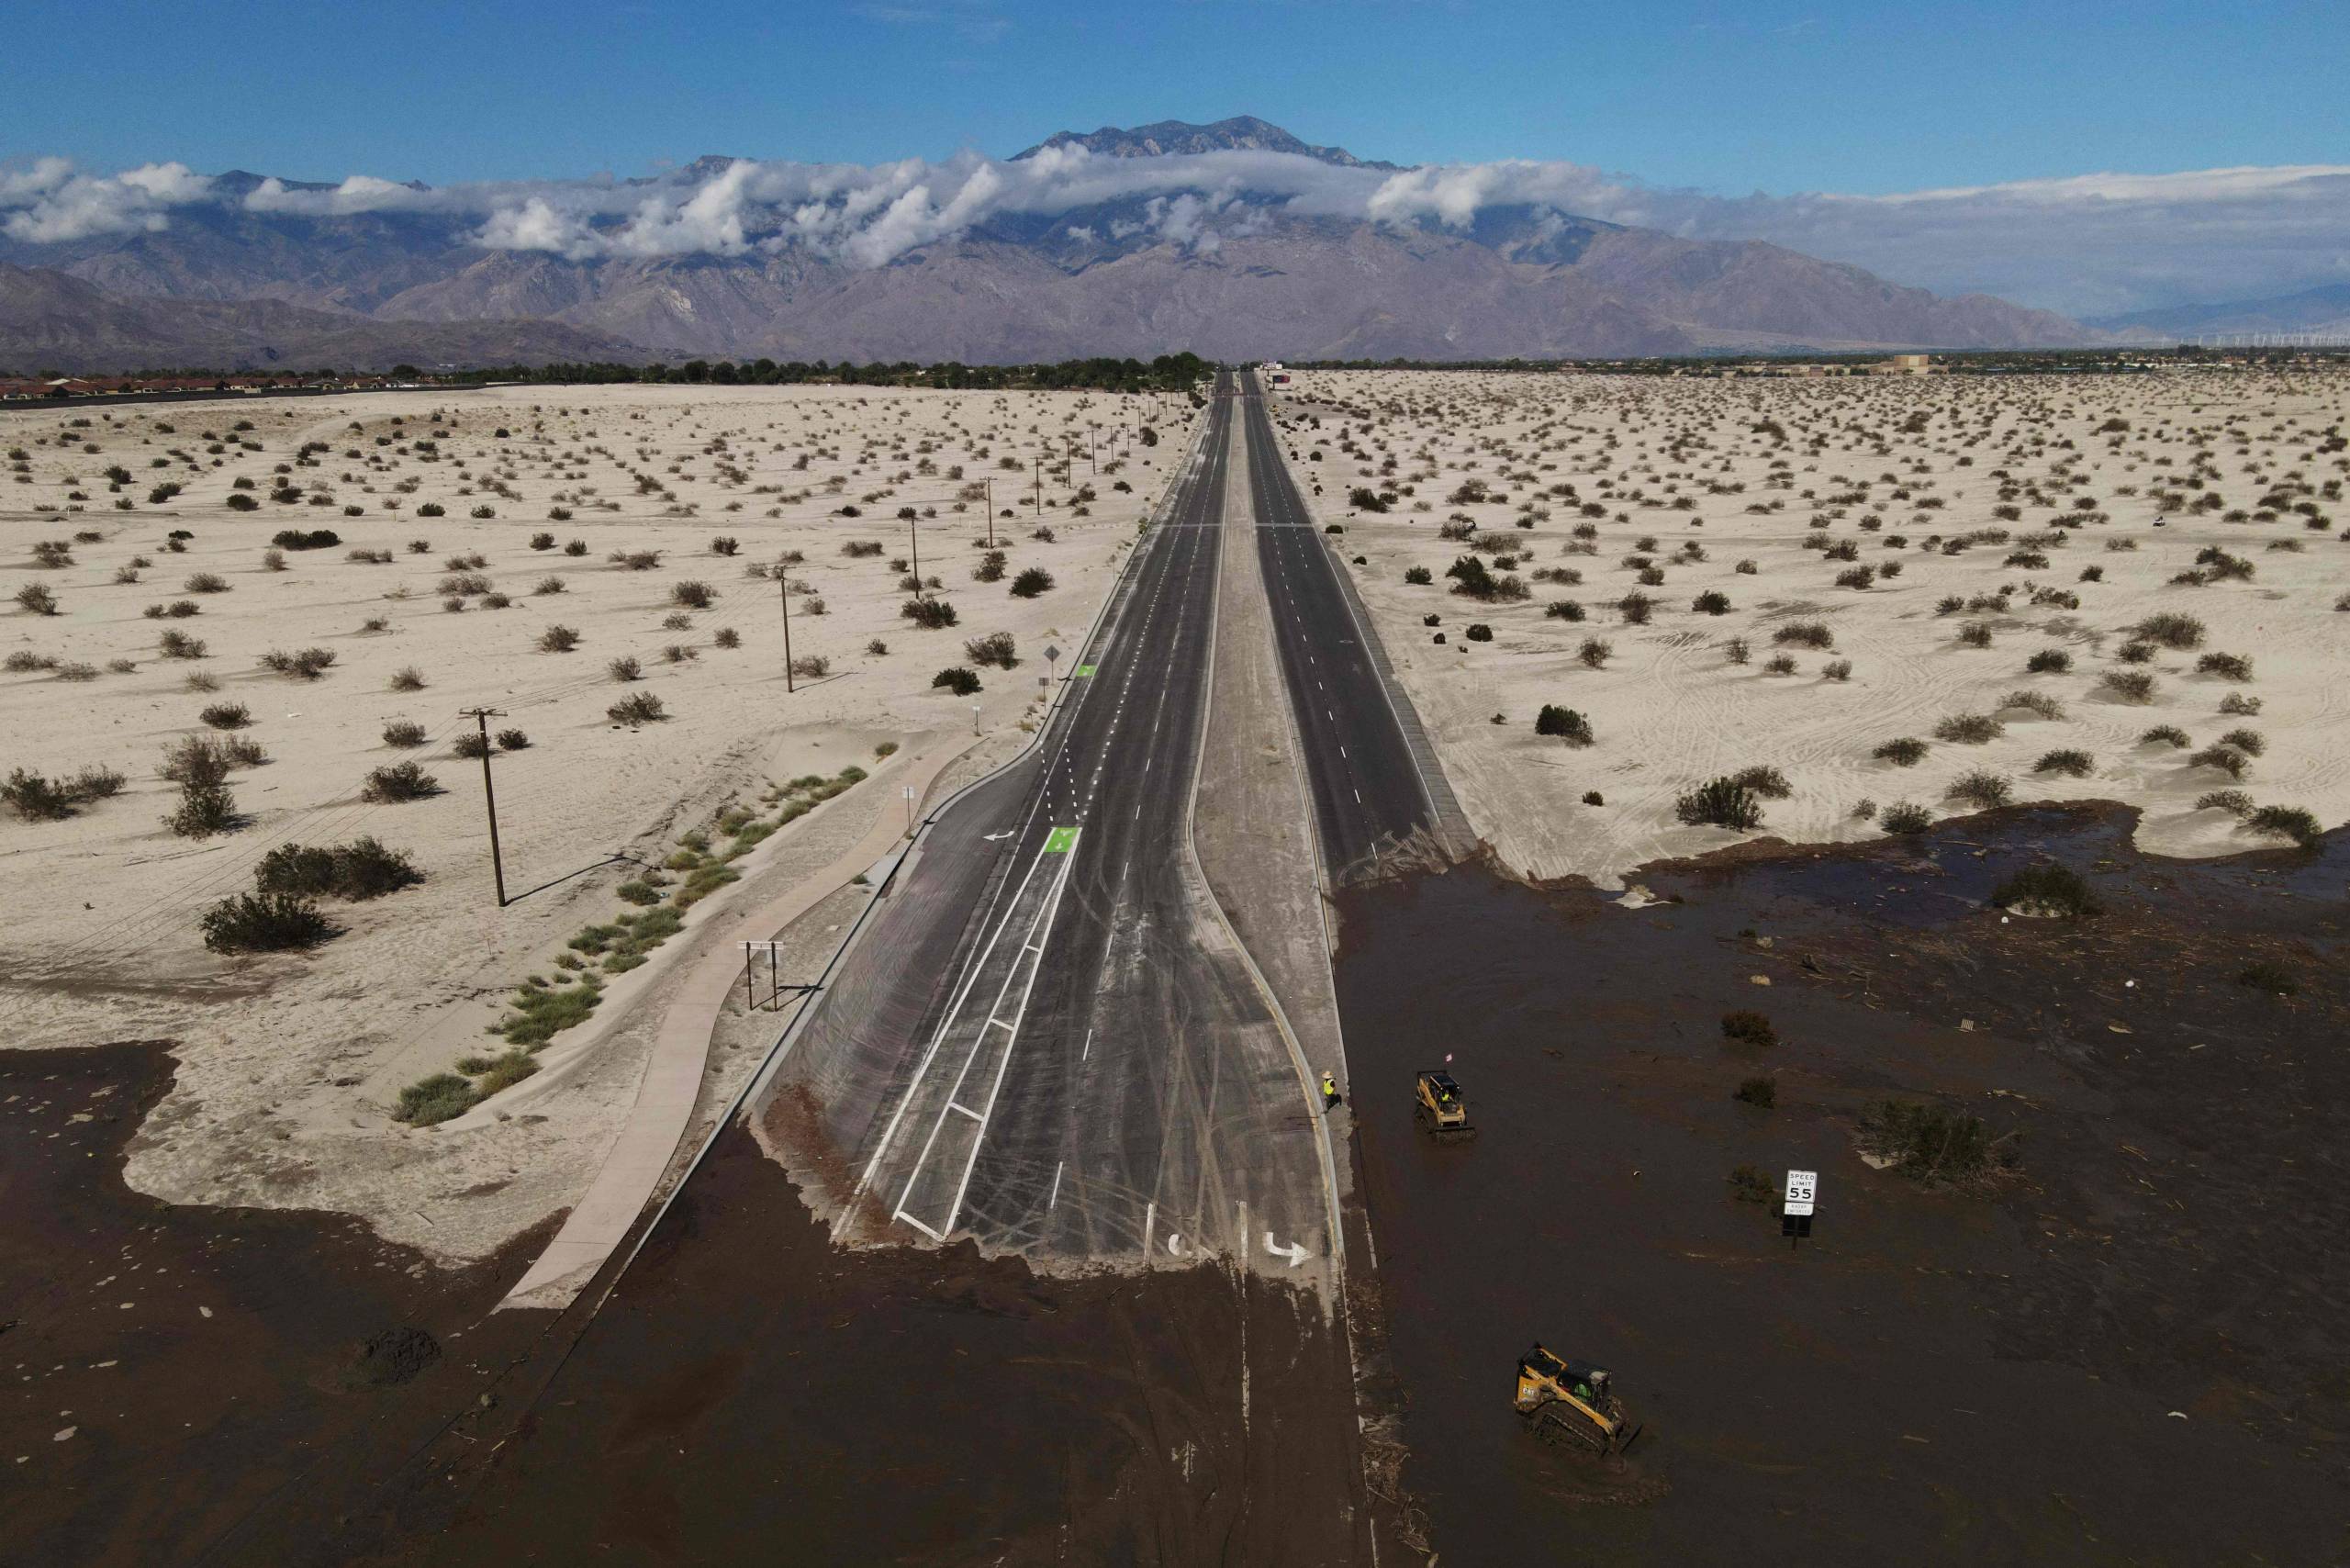 A large freeway cuts through the desert landscape. However, parts of this road are completely blocked off by large quantities of water that remain after heavy rains.